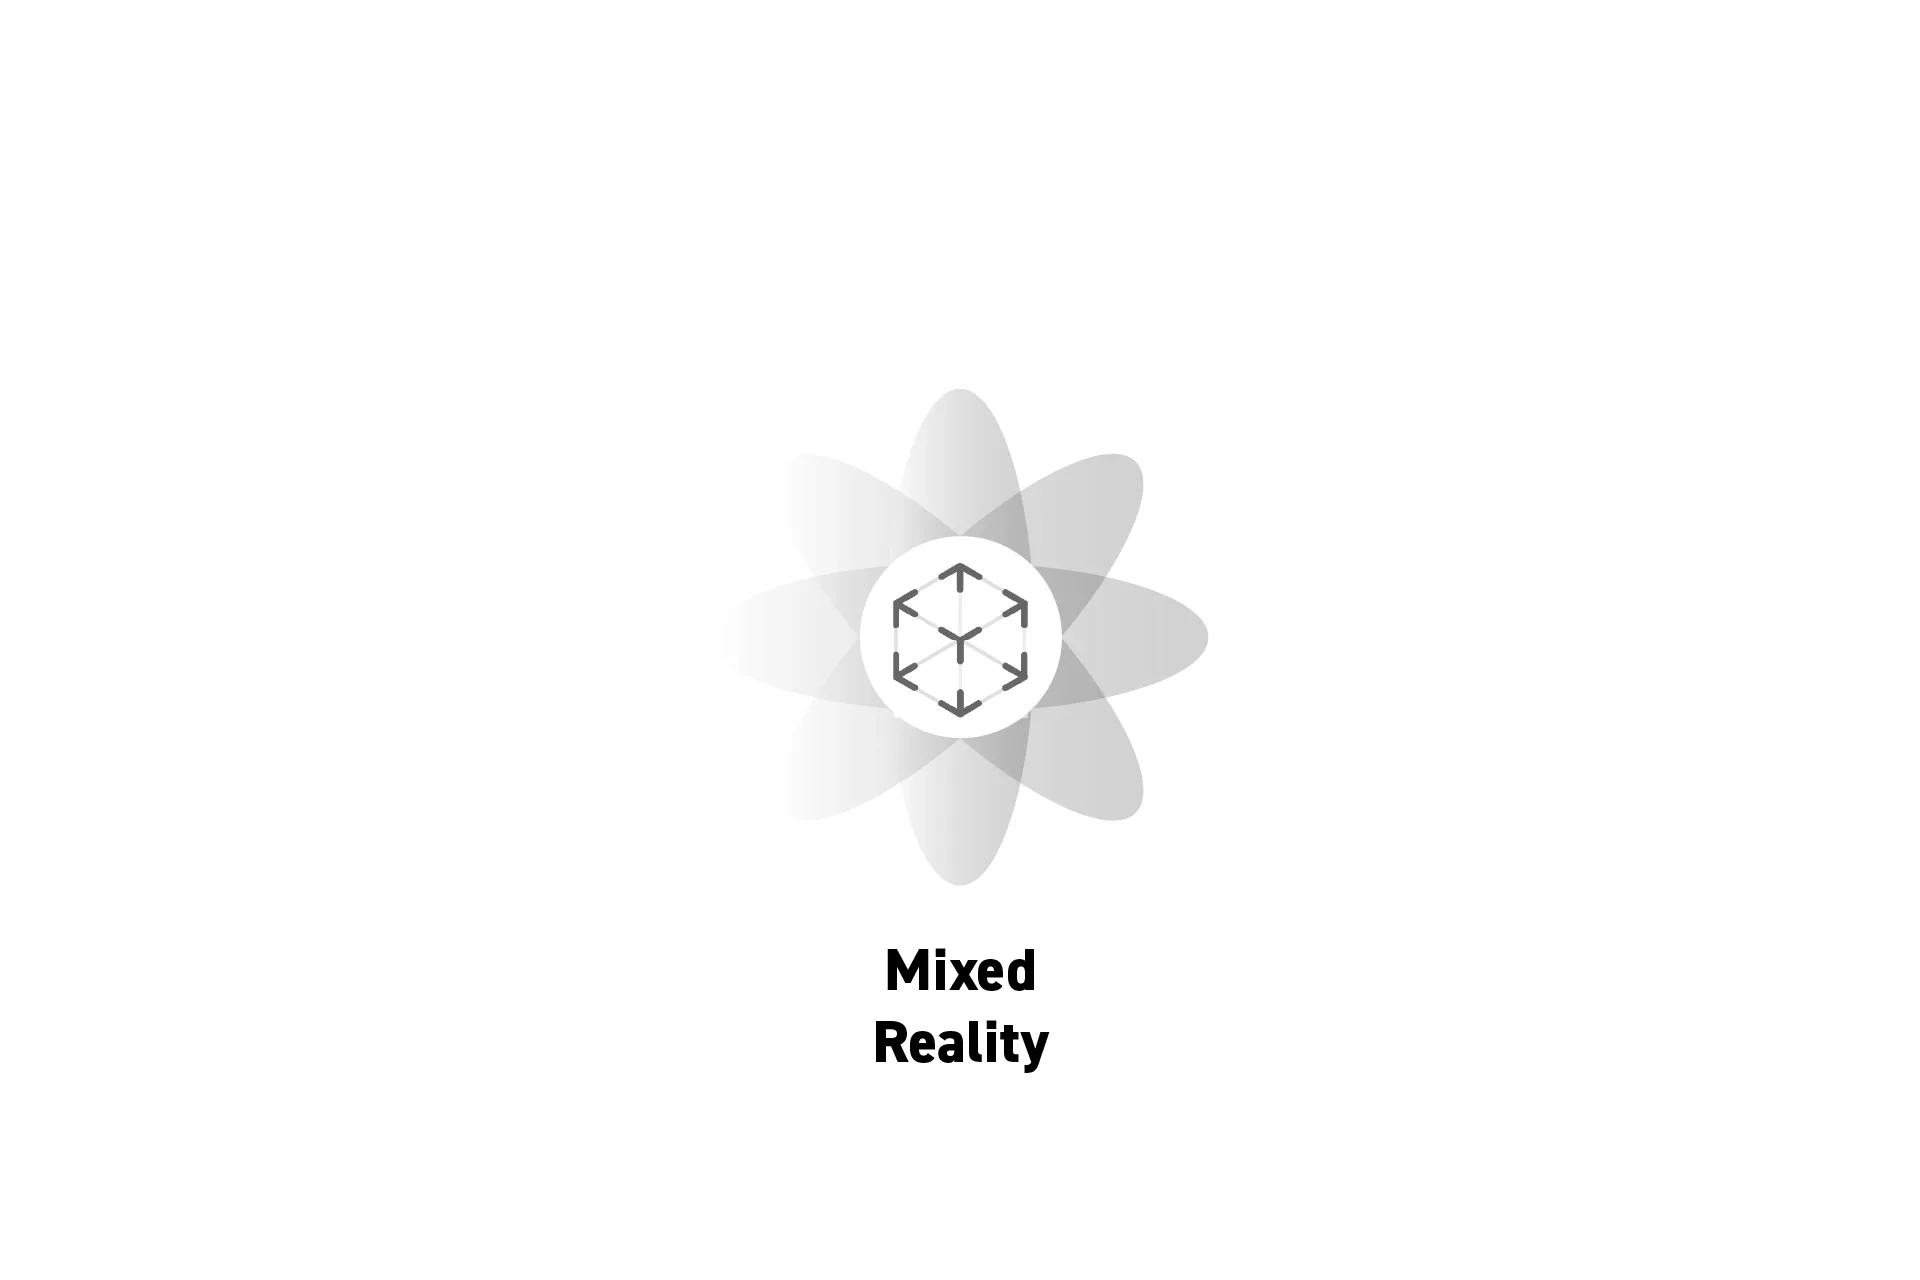 A flower that represents spatial computing with the text "Mixed Reality" beneath it.